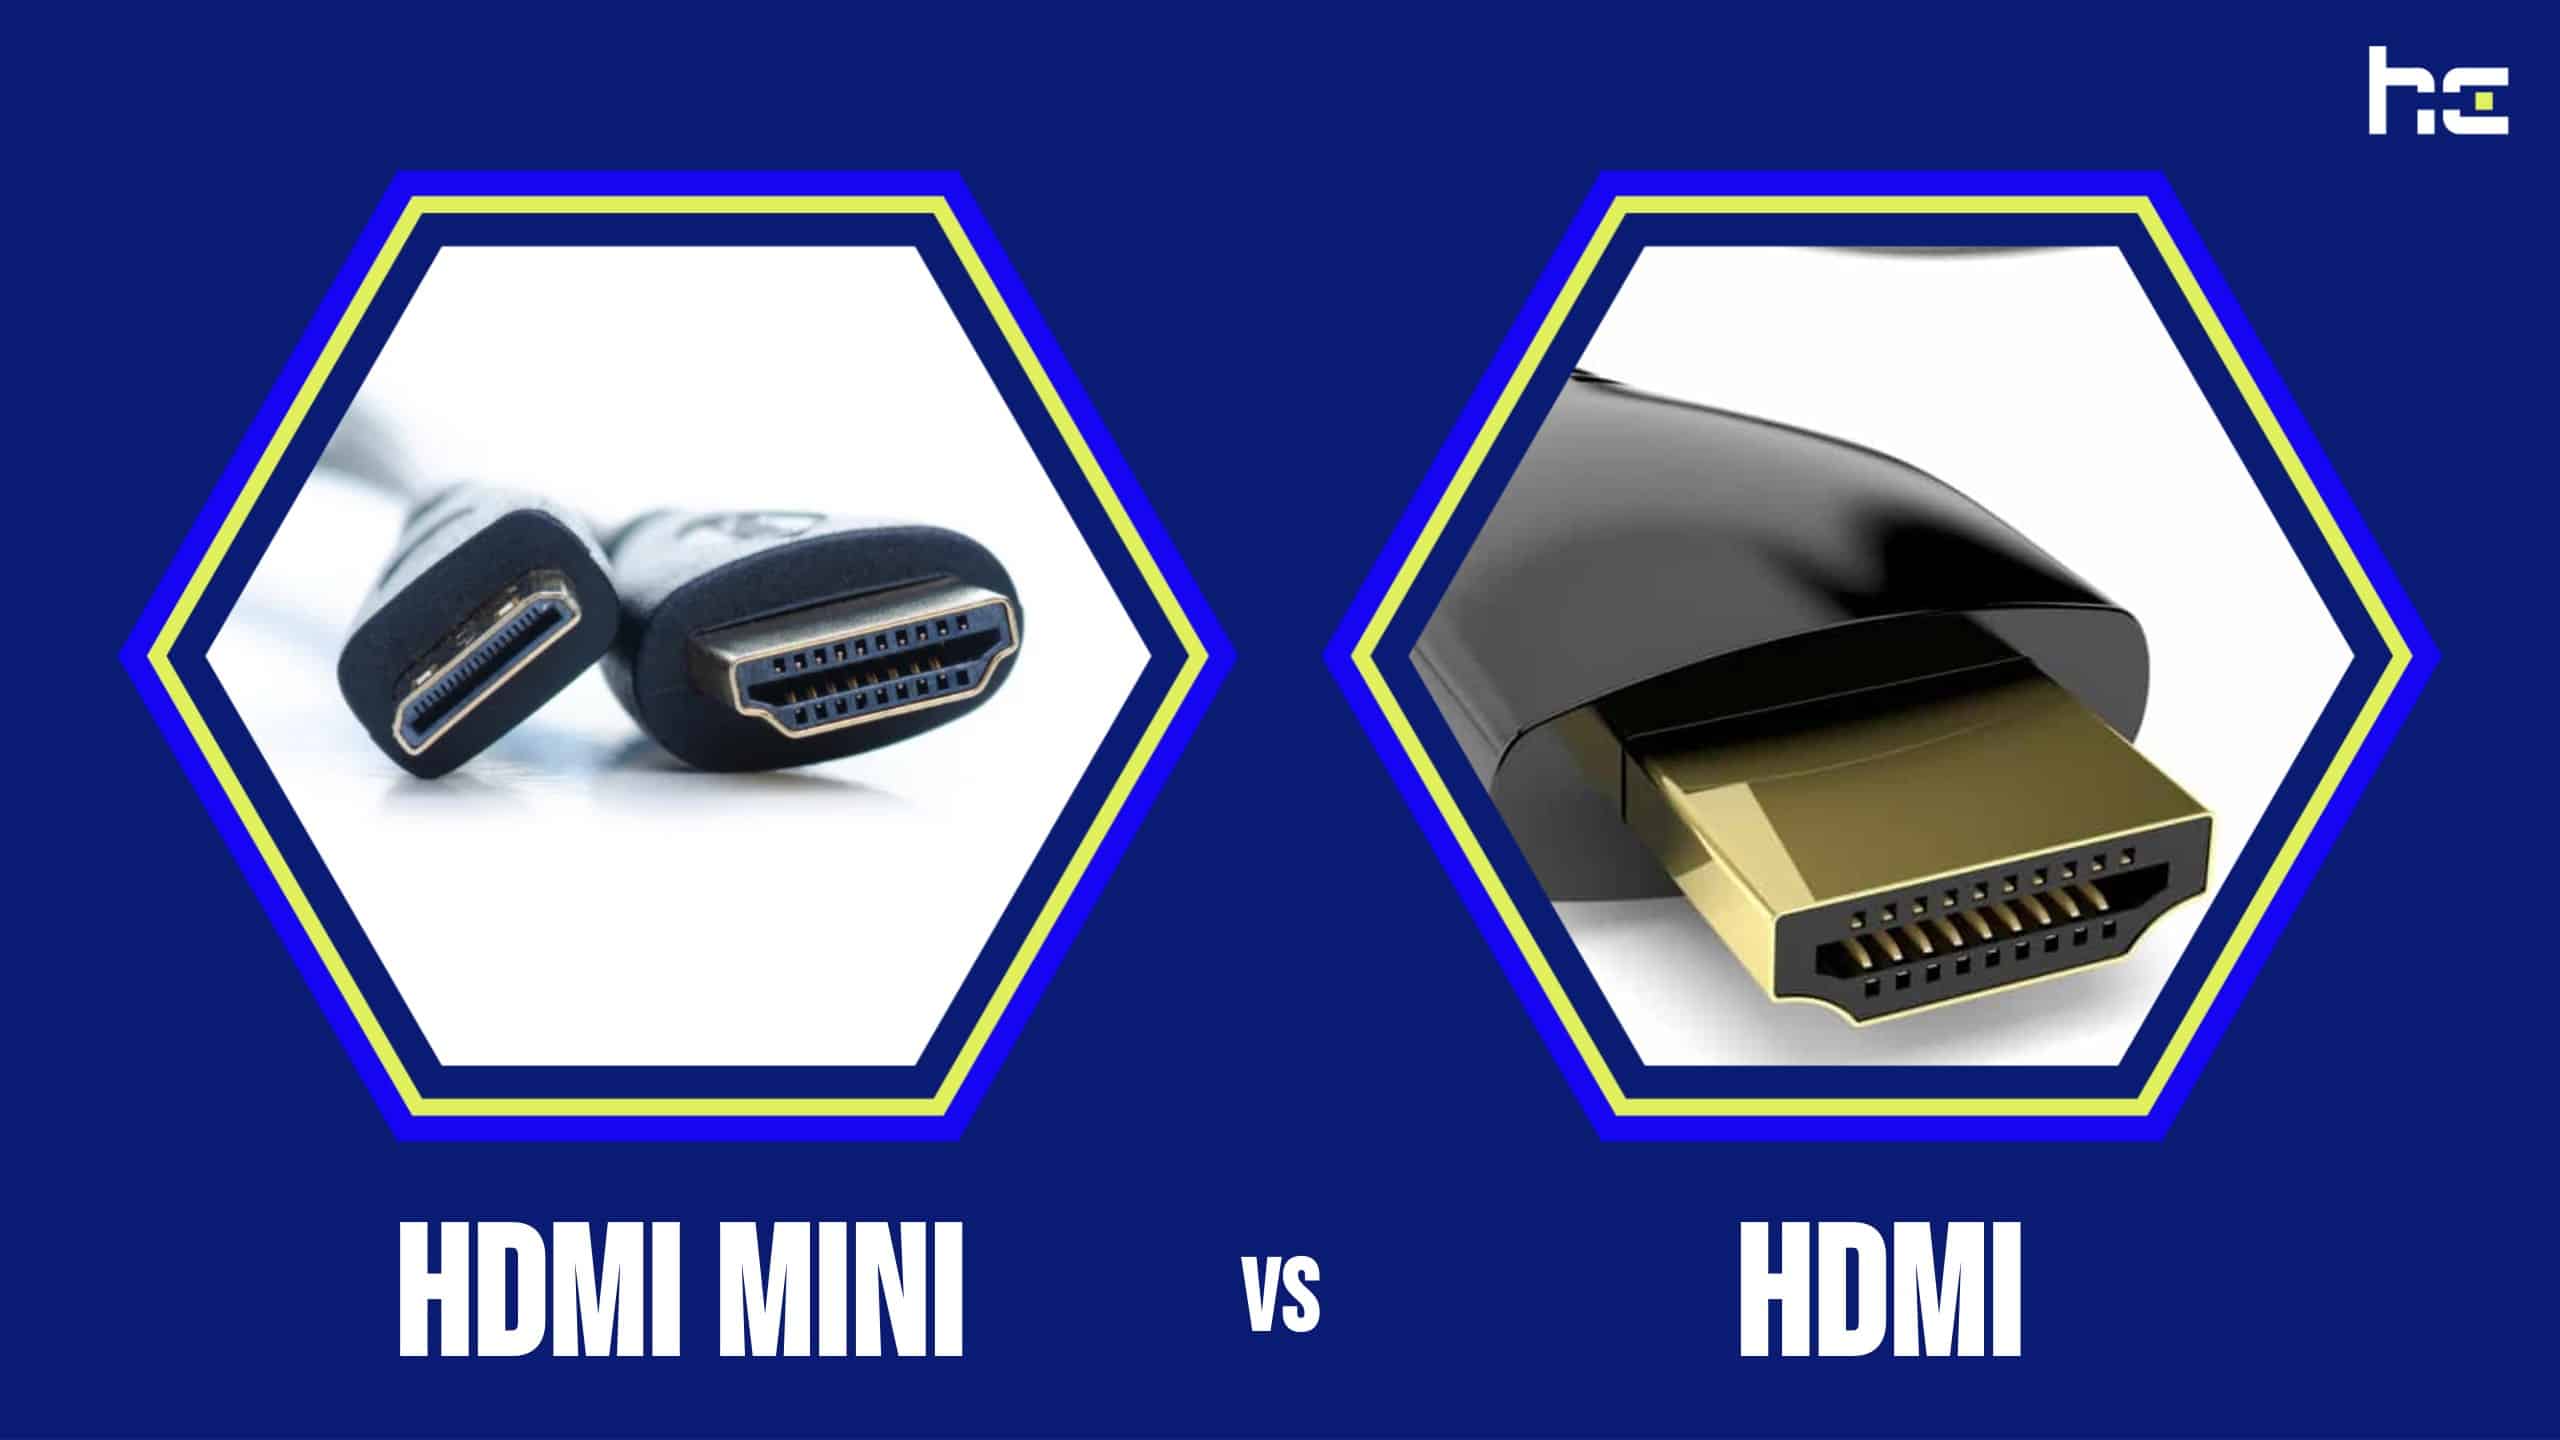 HDMI 2.0 vs 1.4: What's the difference?